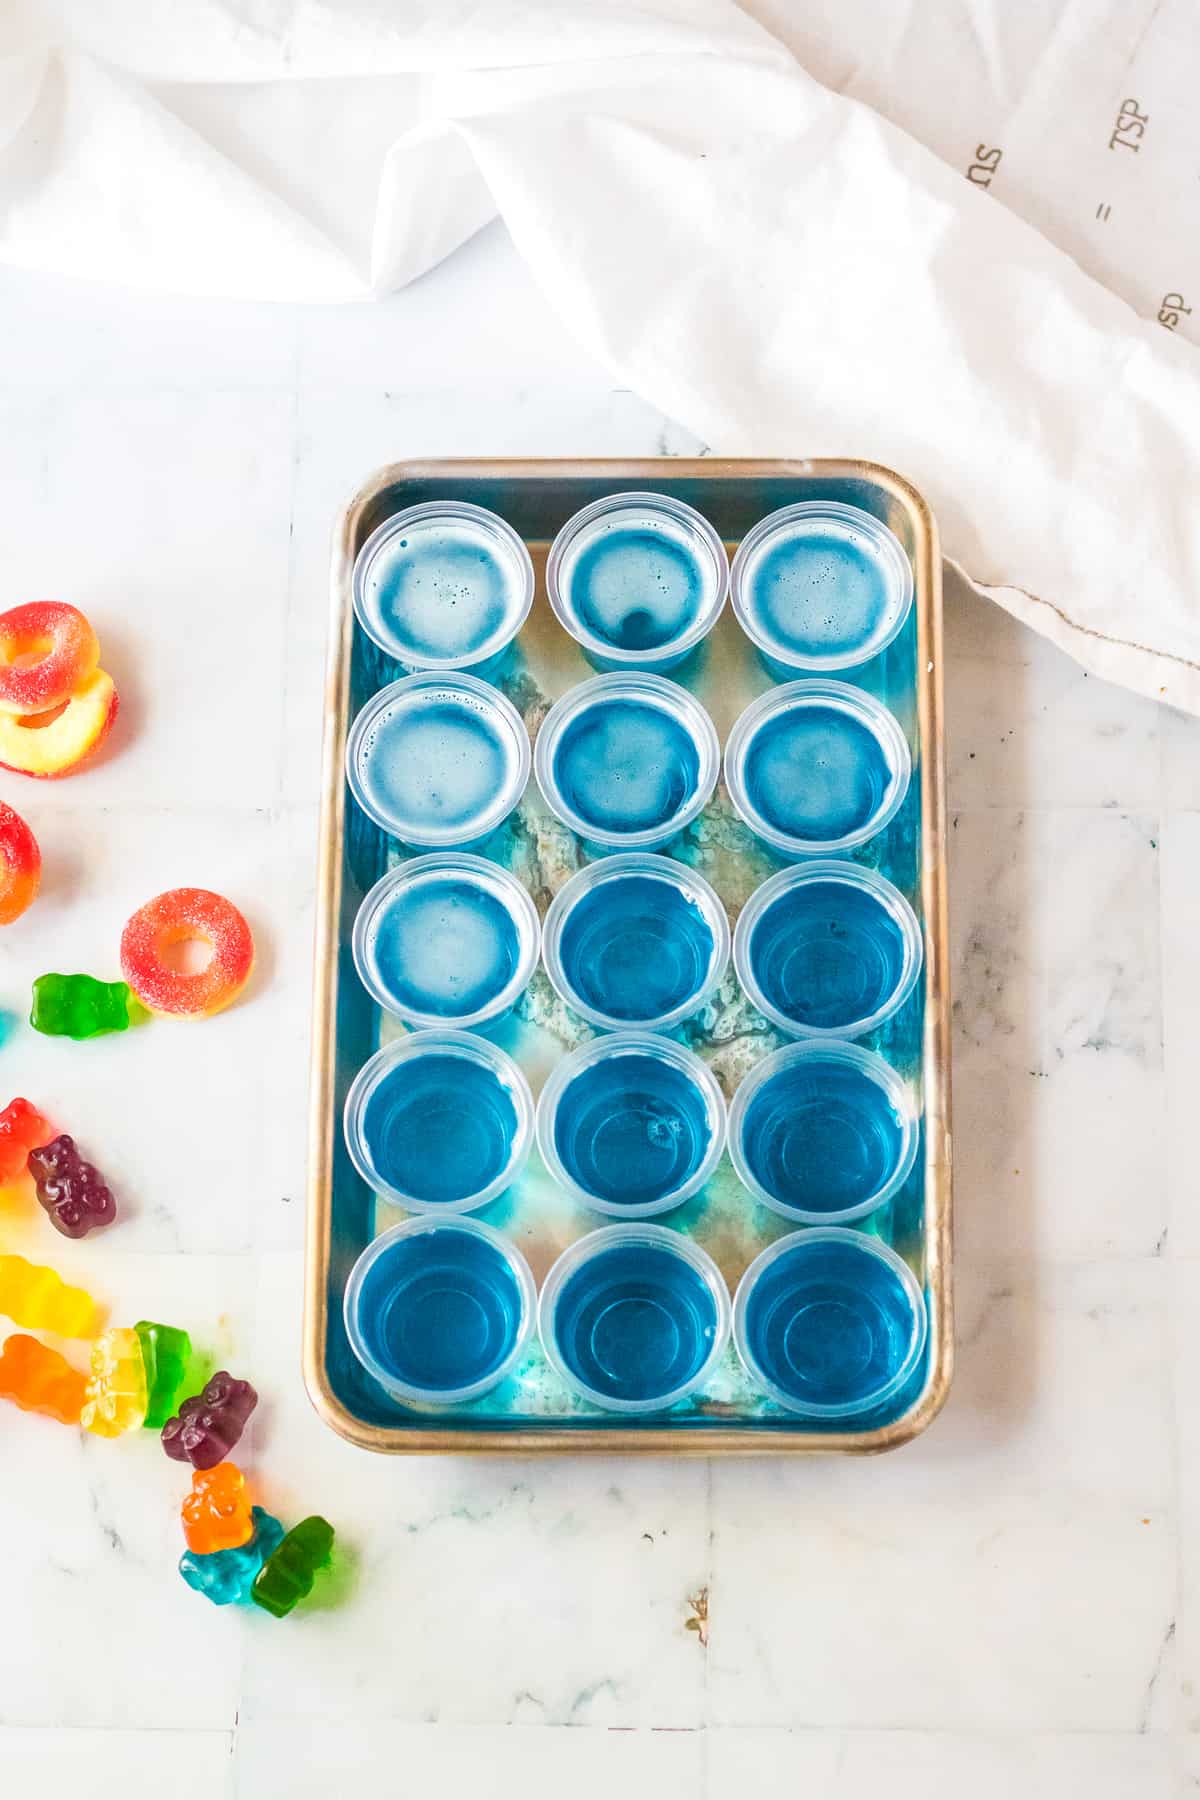 Small cups filled with blue jello mixture